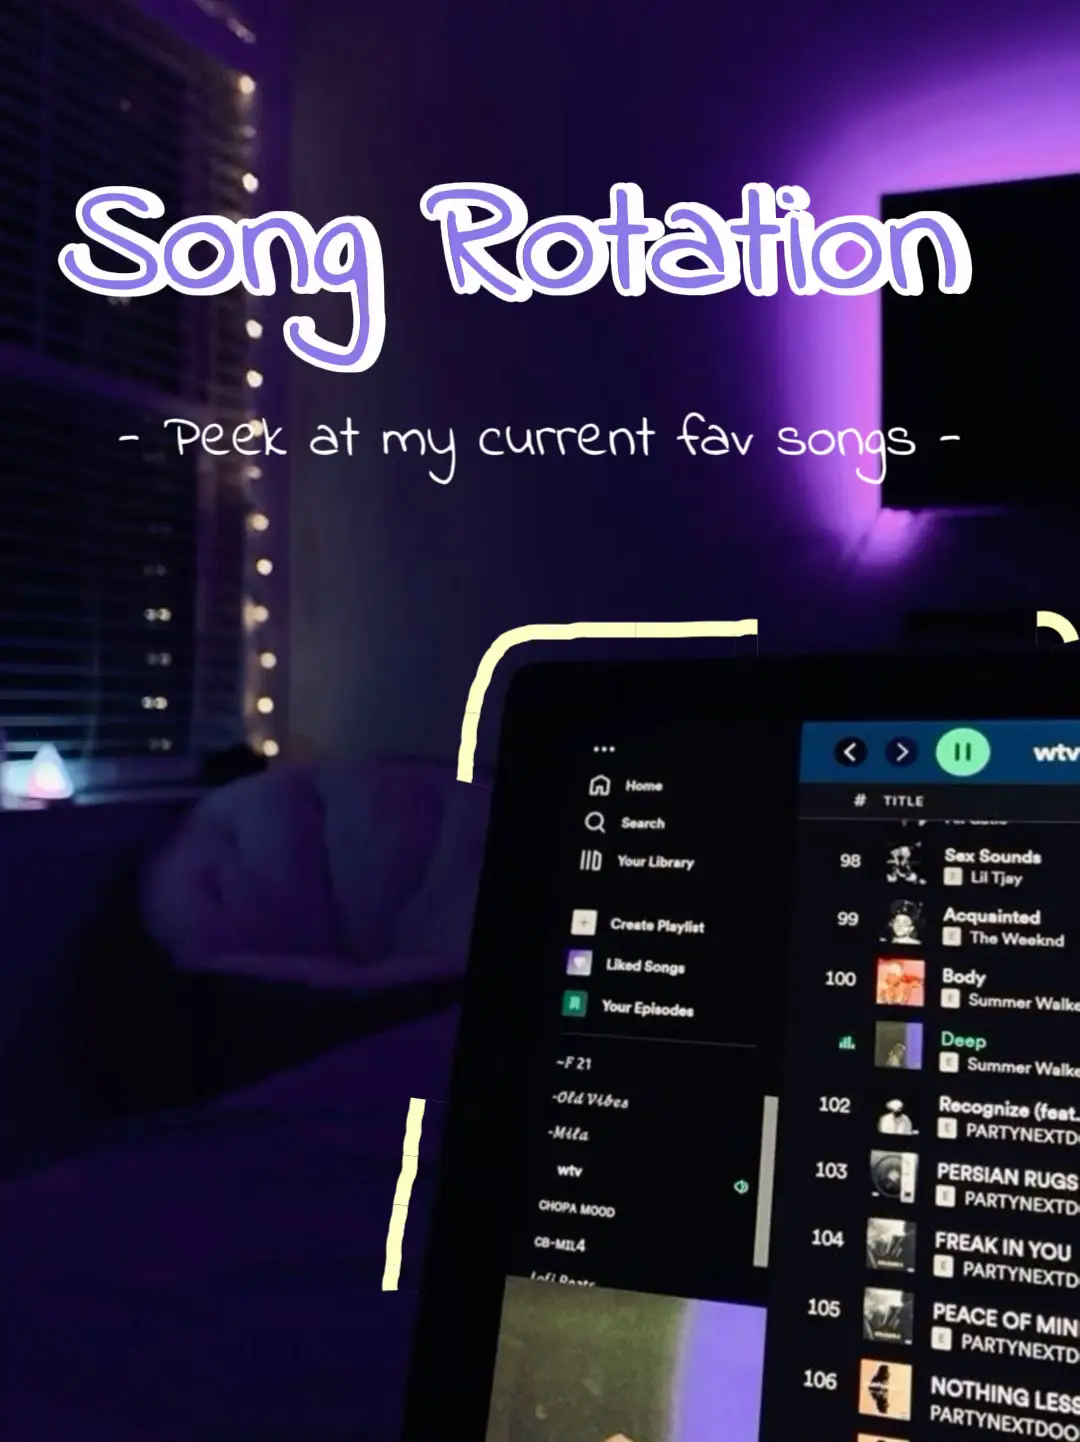  A laptop screen with a song rotation